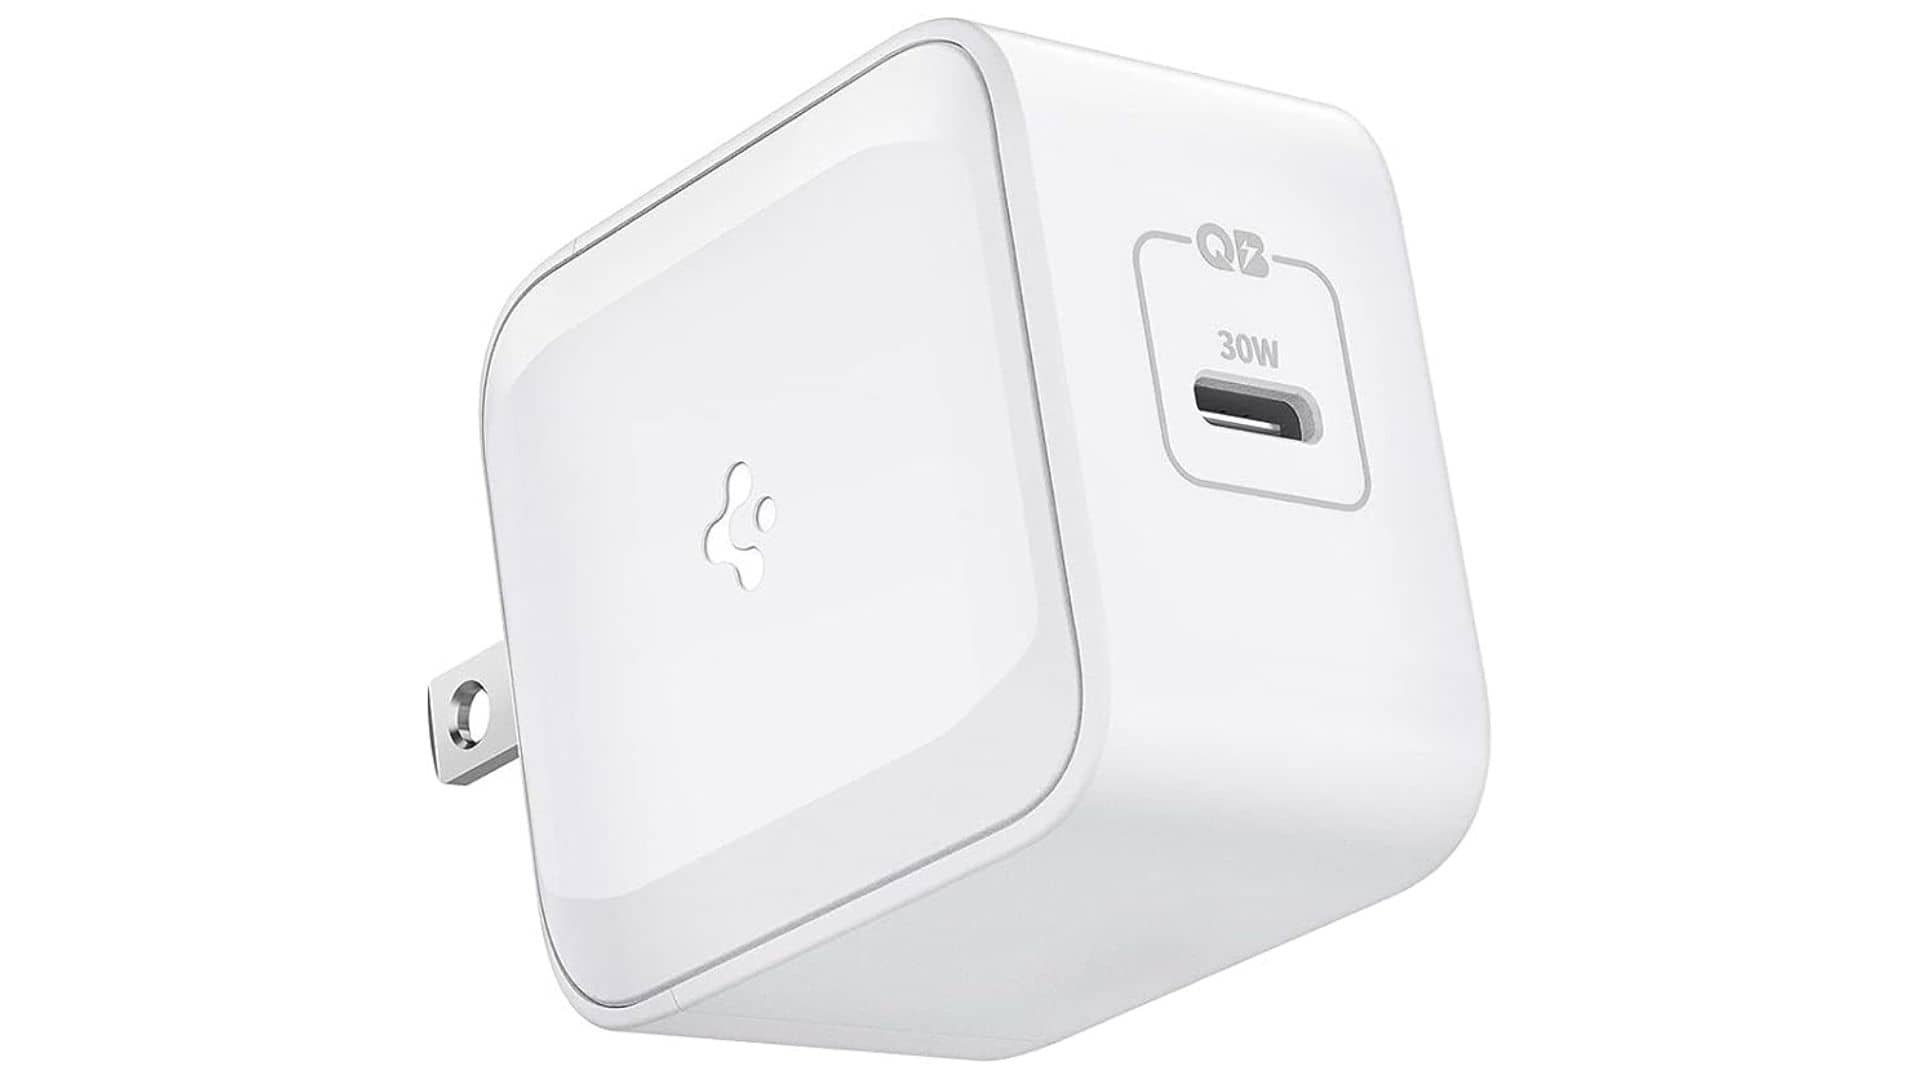 Spigen ArcStation Pro 30W Wall Charger - The Good Old White Shirt of Chargers